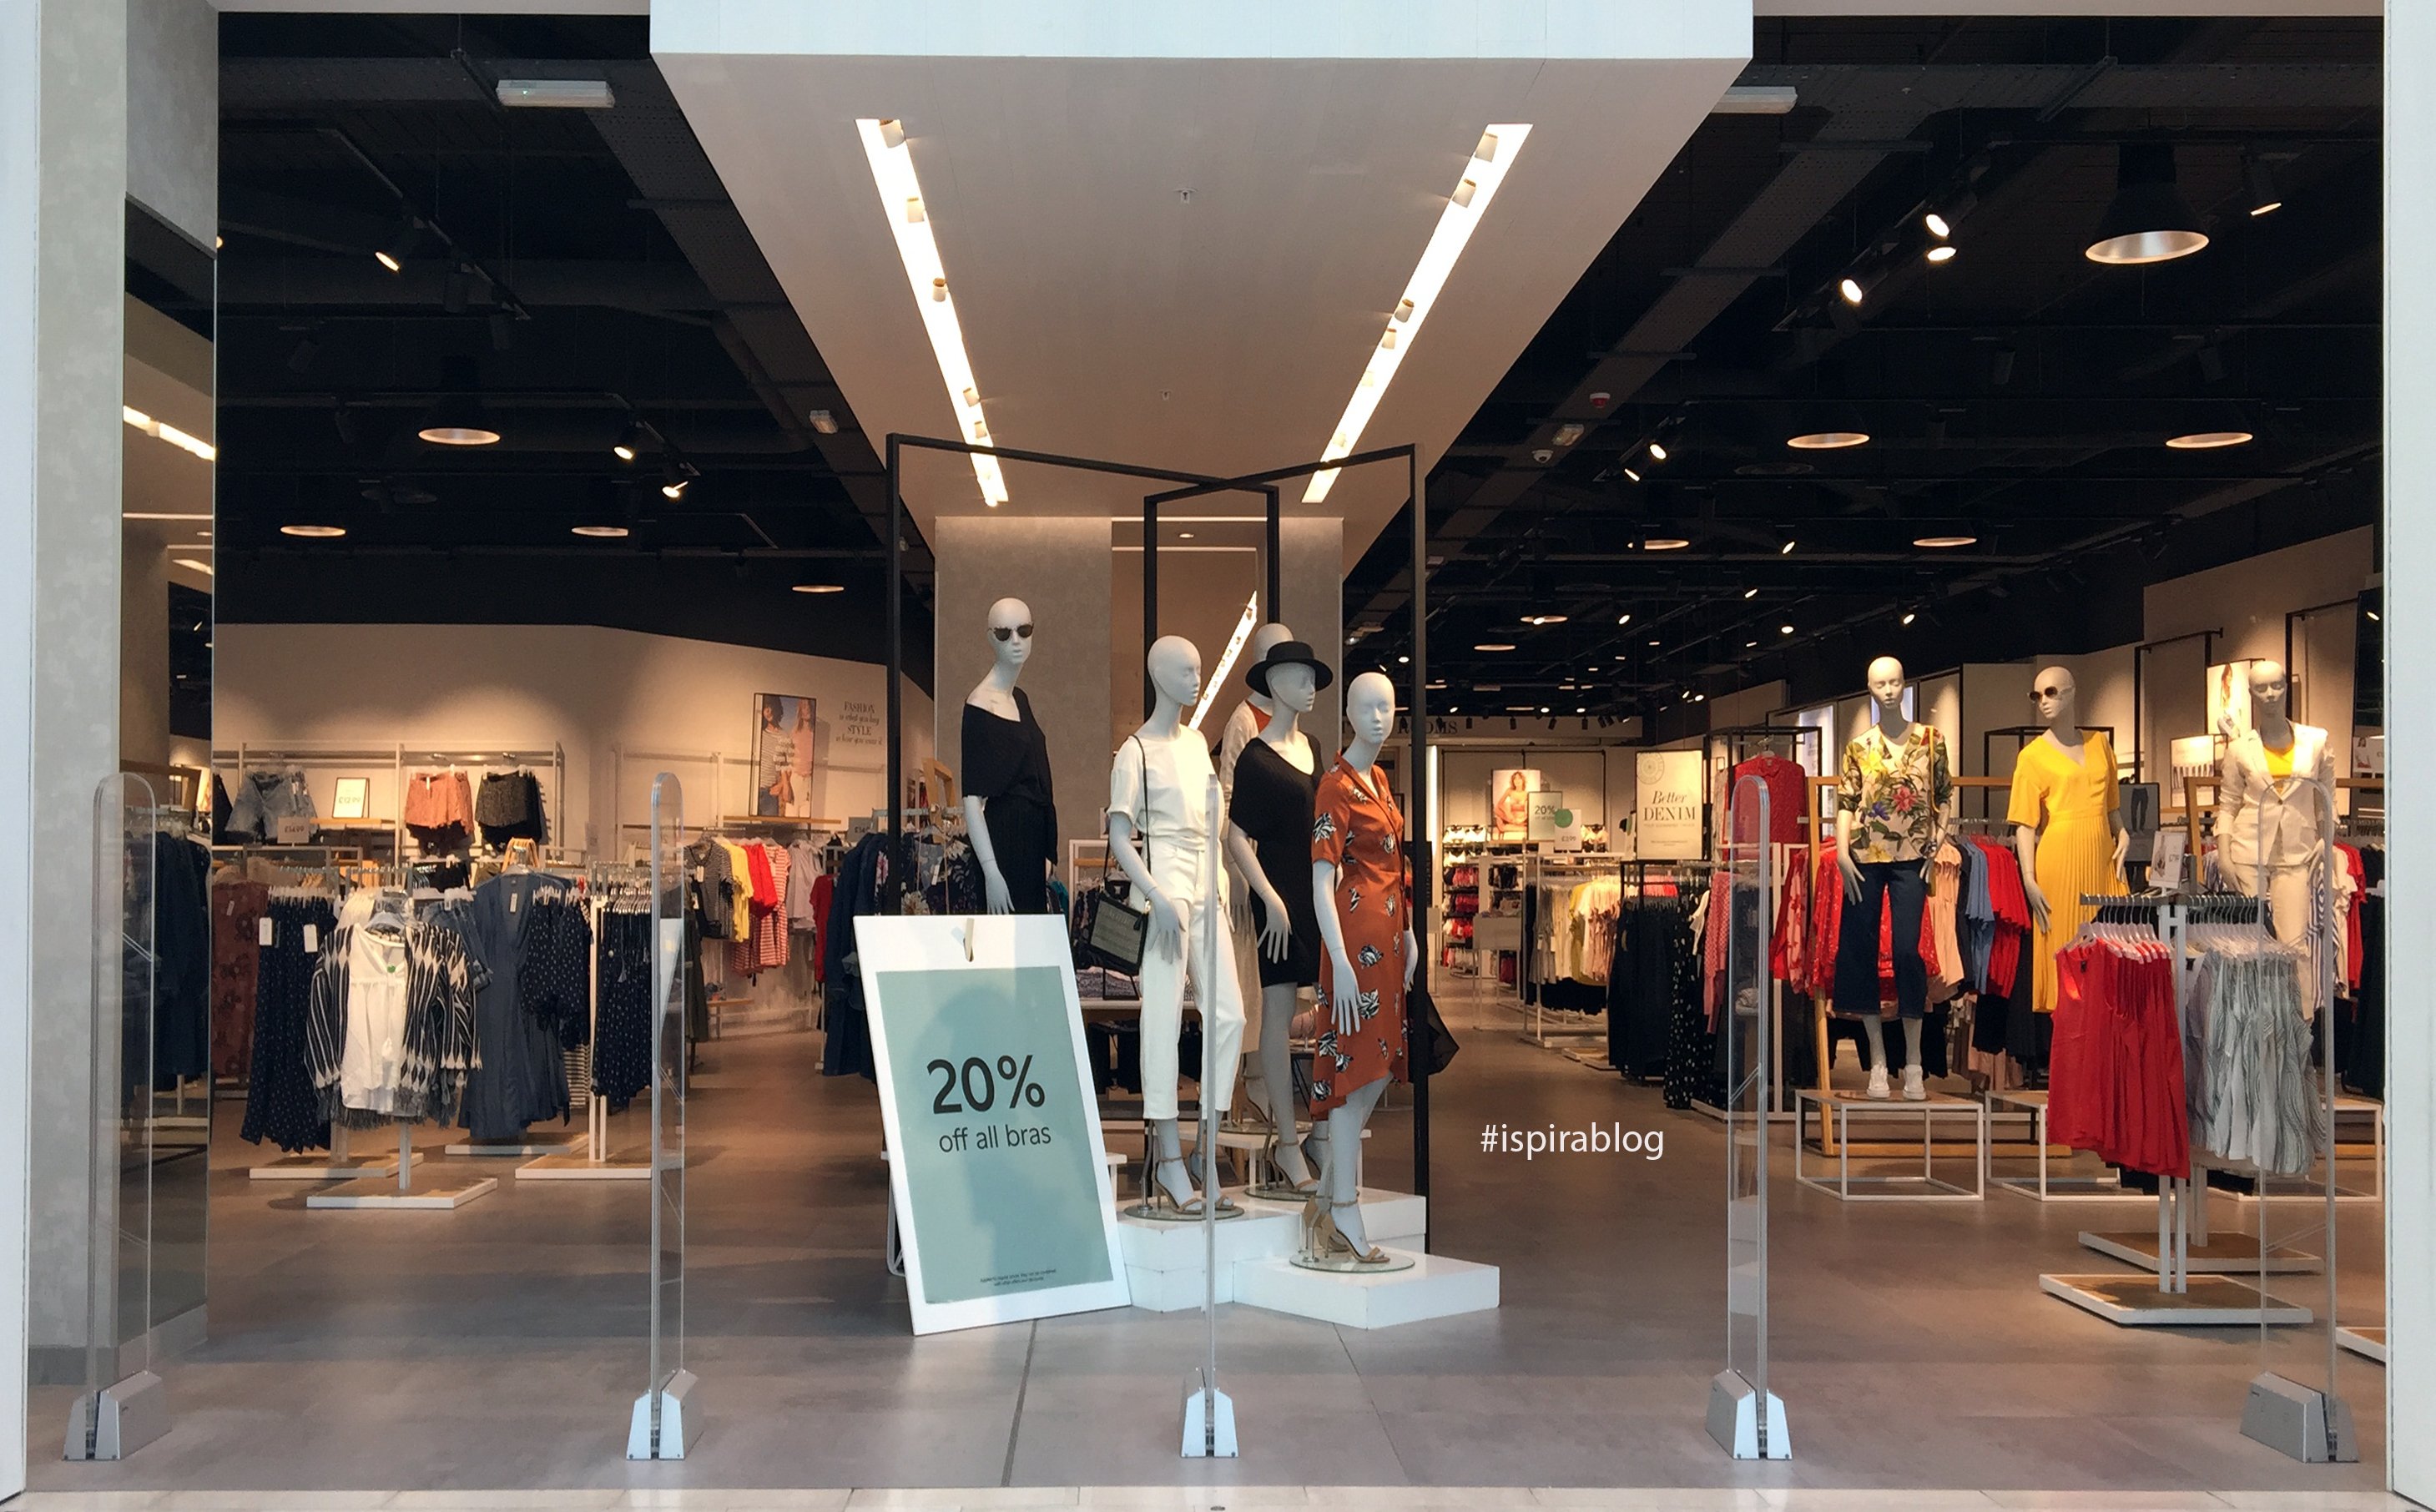 Maisons du Monde opened 3 concessions in London Westfield